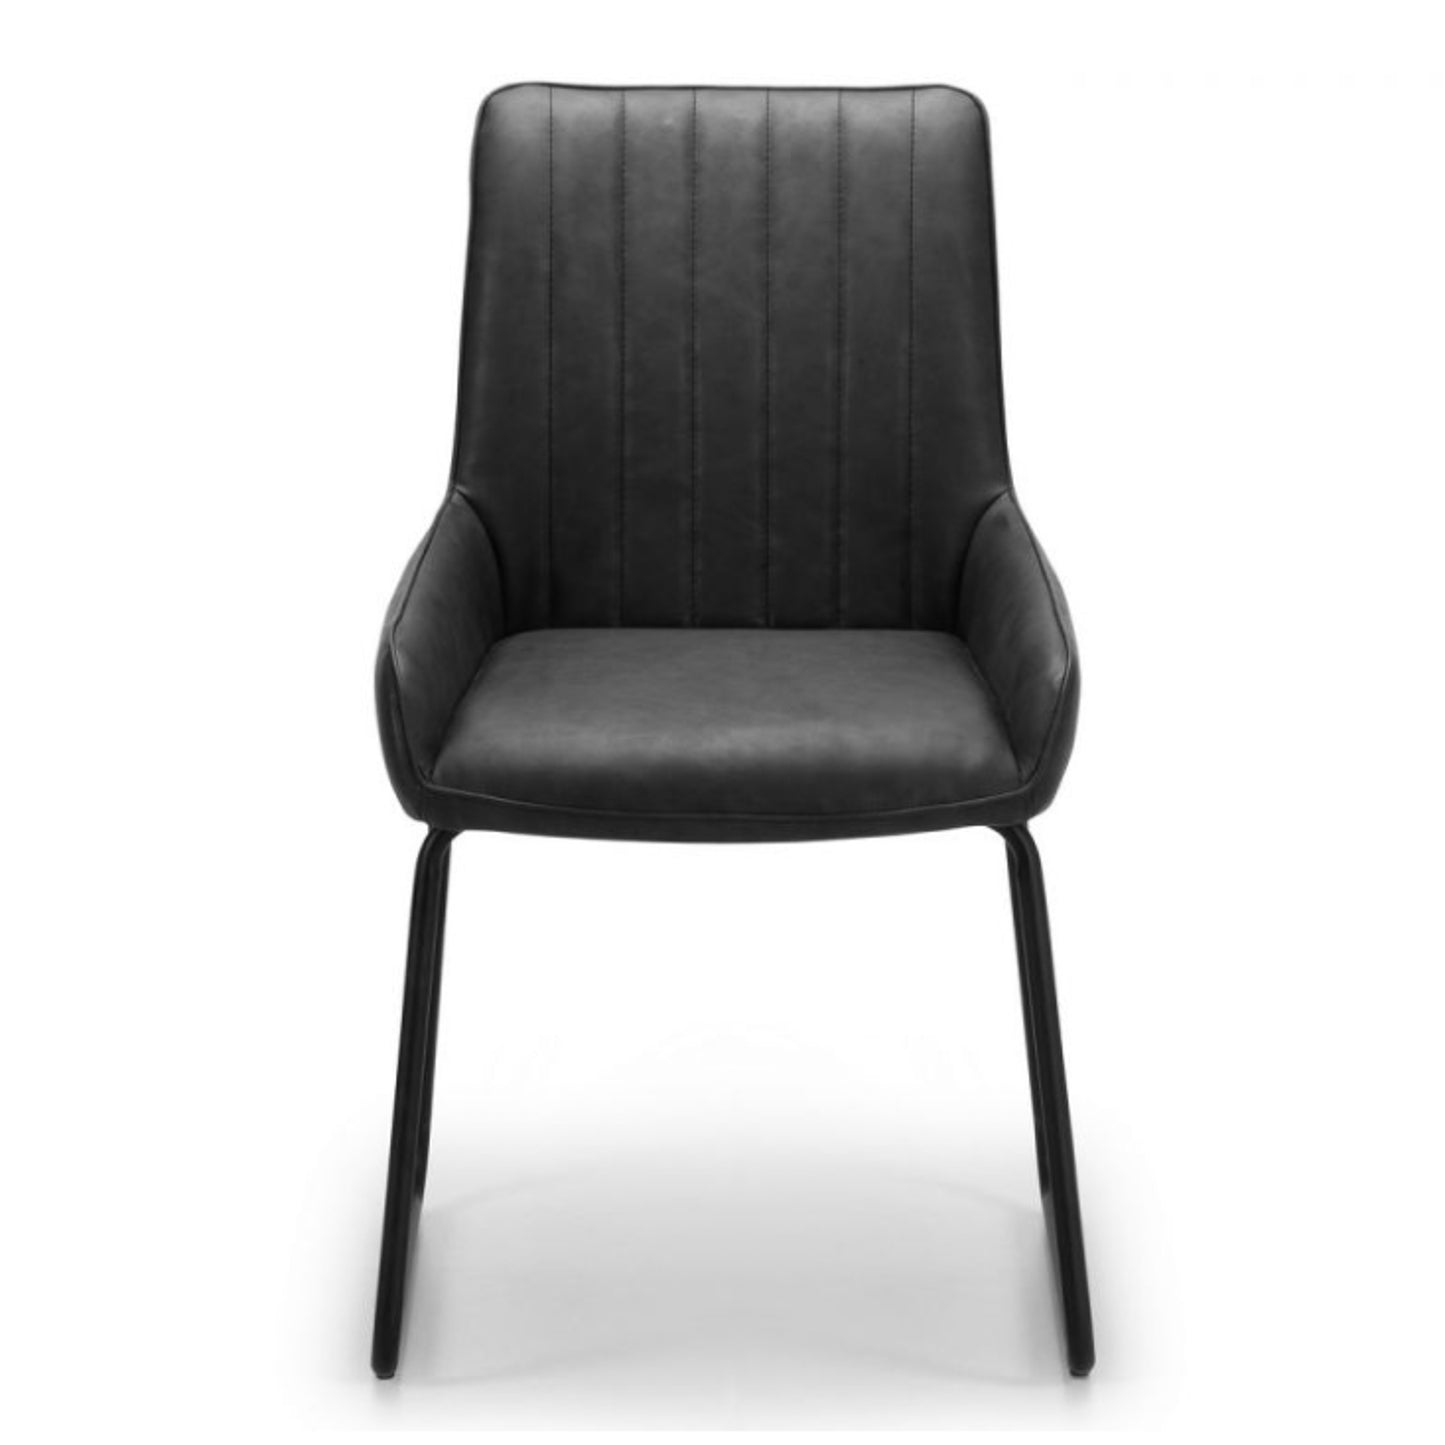 2 Soho Dining Chairs Black Faux Leather